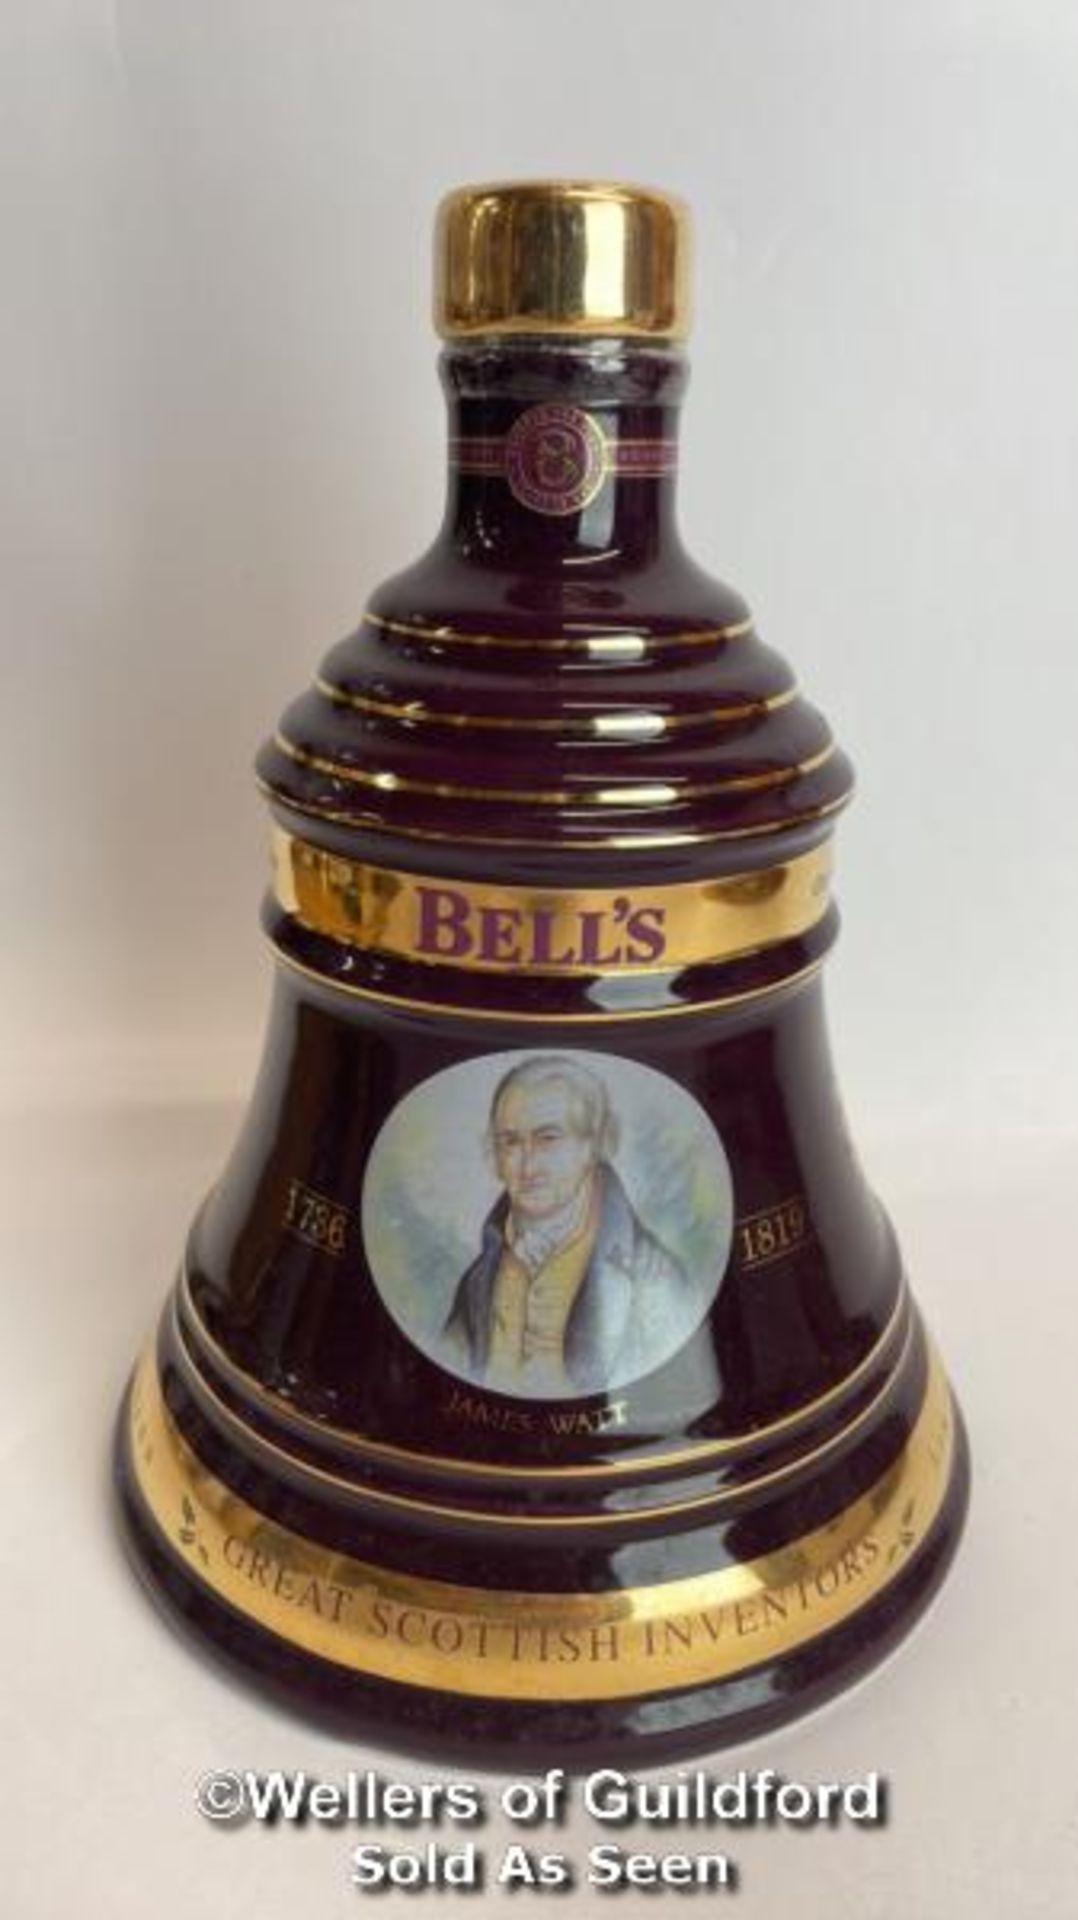 Bell's 2002 Old Scotch Whisky Limited Edition Christmas Decanter, Aged 8 Years, Brand New and Boxed, - Image 4 of 8